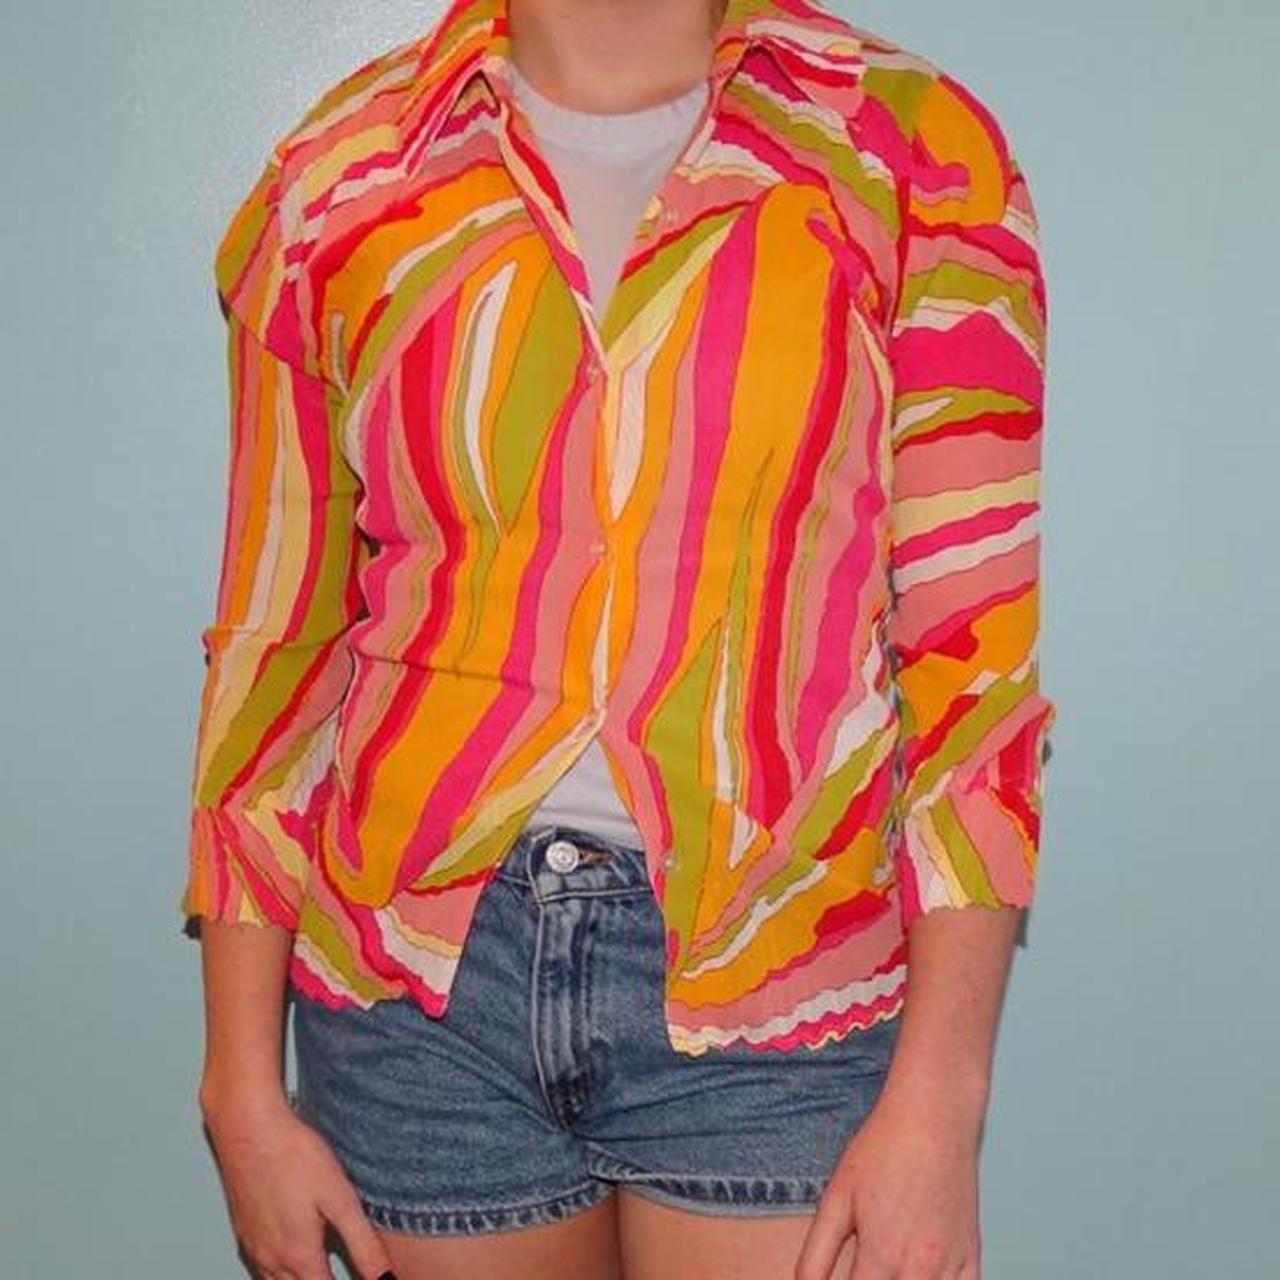 Product Image 2 - vintage button up 
size:small
brand:unknown
condition:10/10
model: size